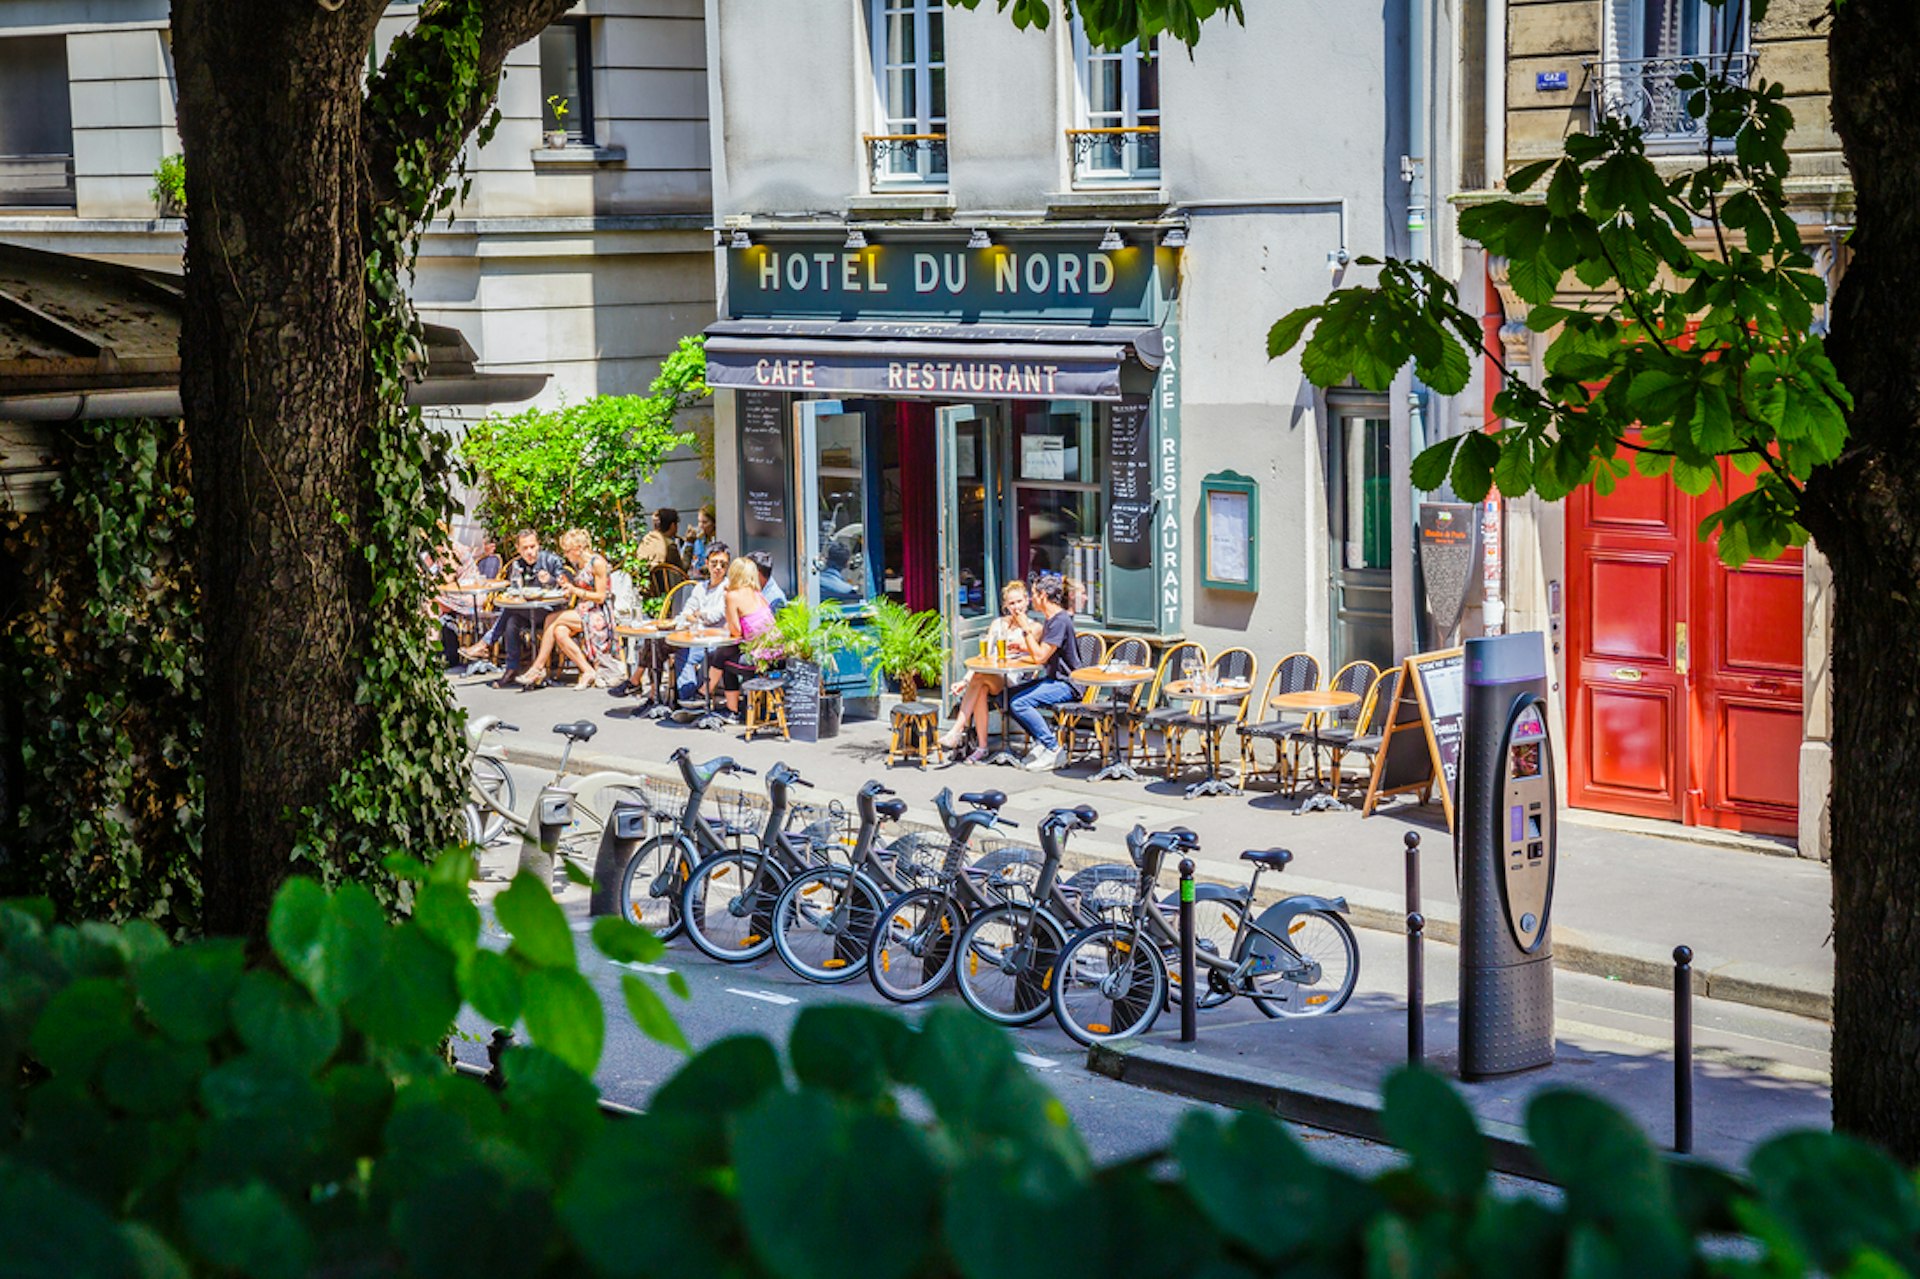 People sat at tables outside a cafe called Hotel du Nord. The street is lined with bicycles 